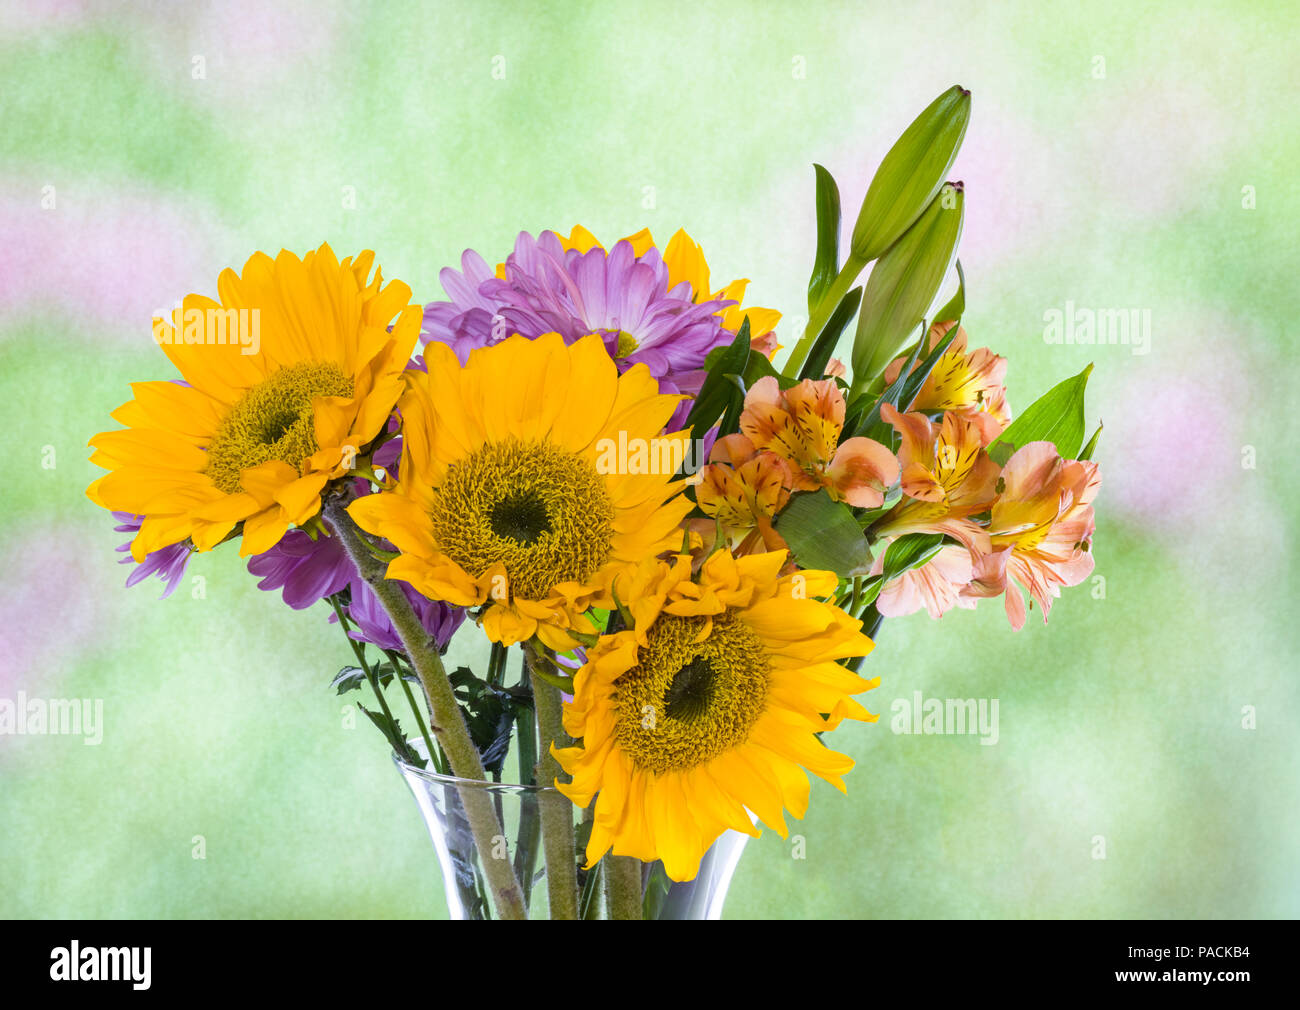 Attractive  bouquet arrangement of multi colored flowers in clear glass vase Stock Photo